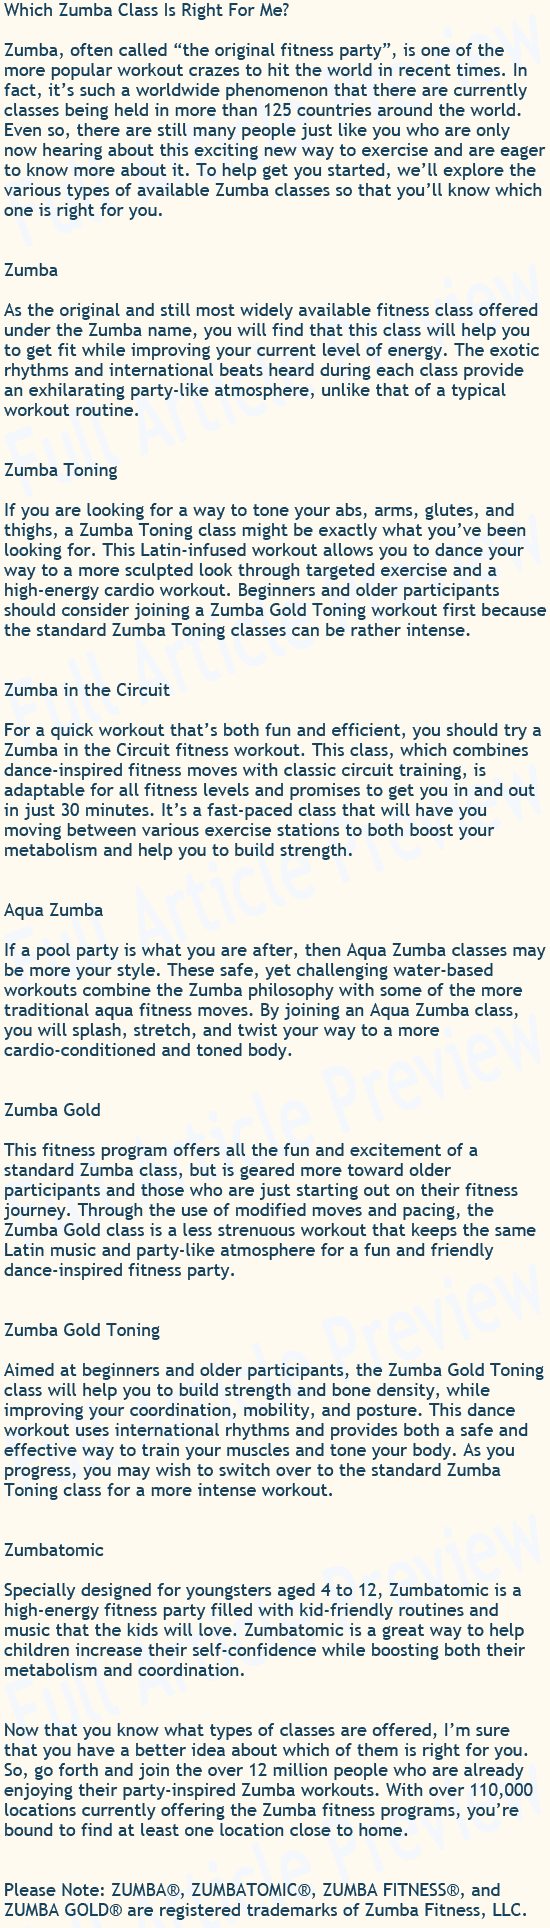 This exercise article talks about the different types of classes offered by Zumba.